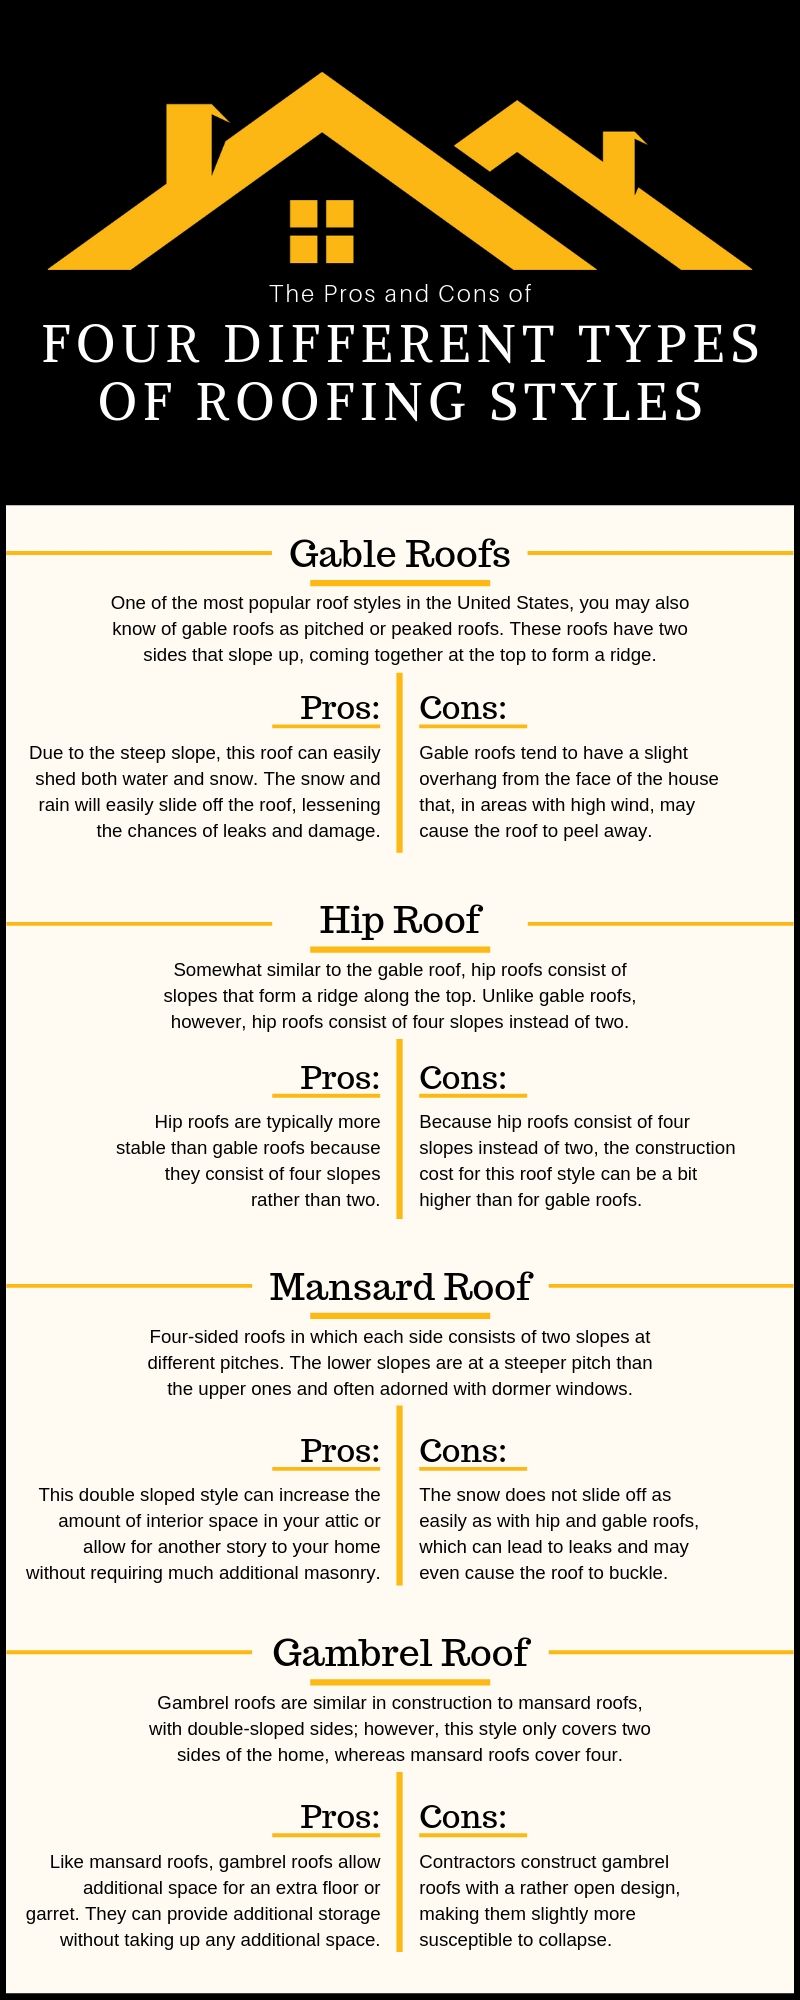 Pros and Cons of Steep-Slope and Low-Slope Roofs